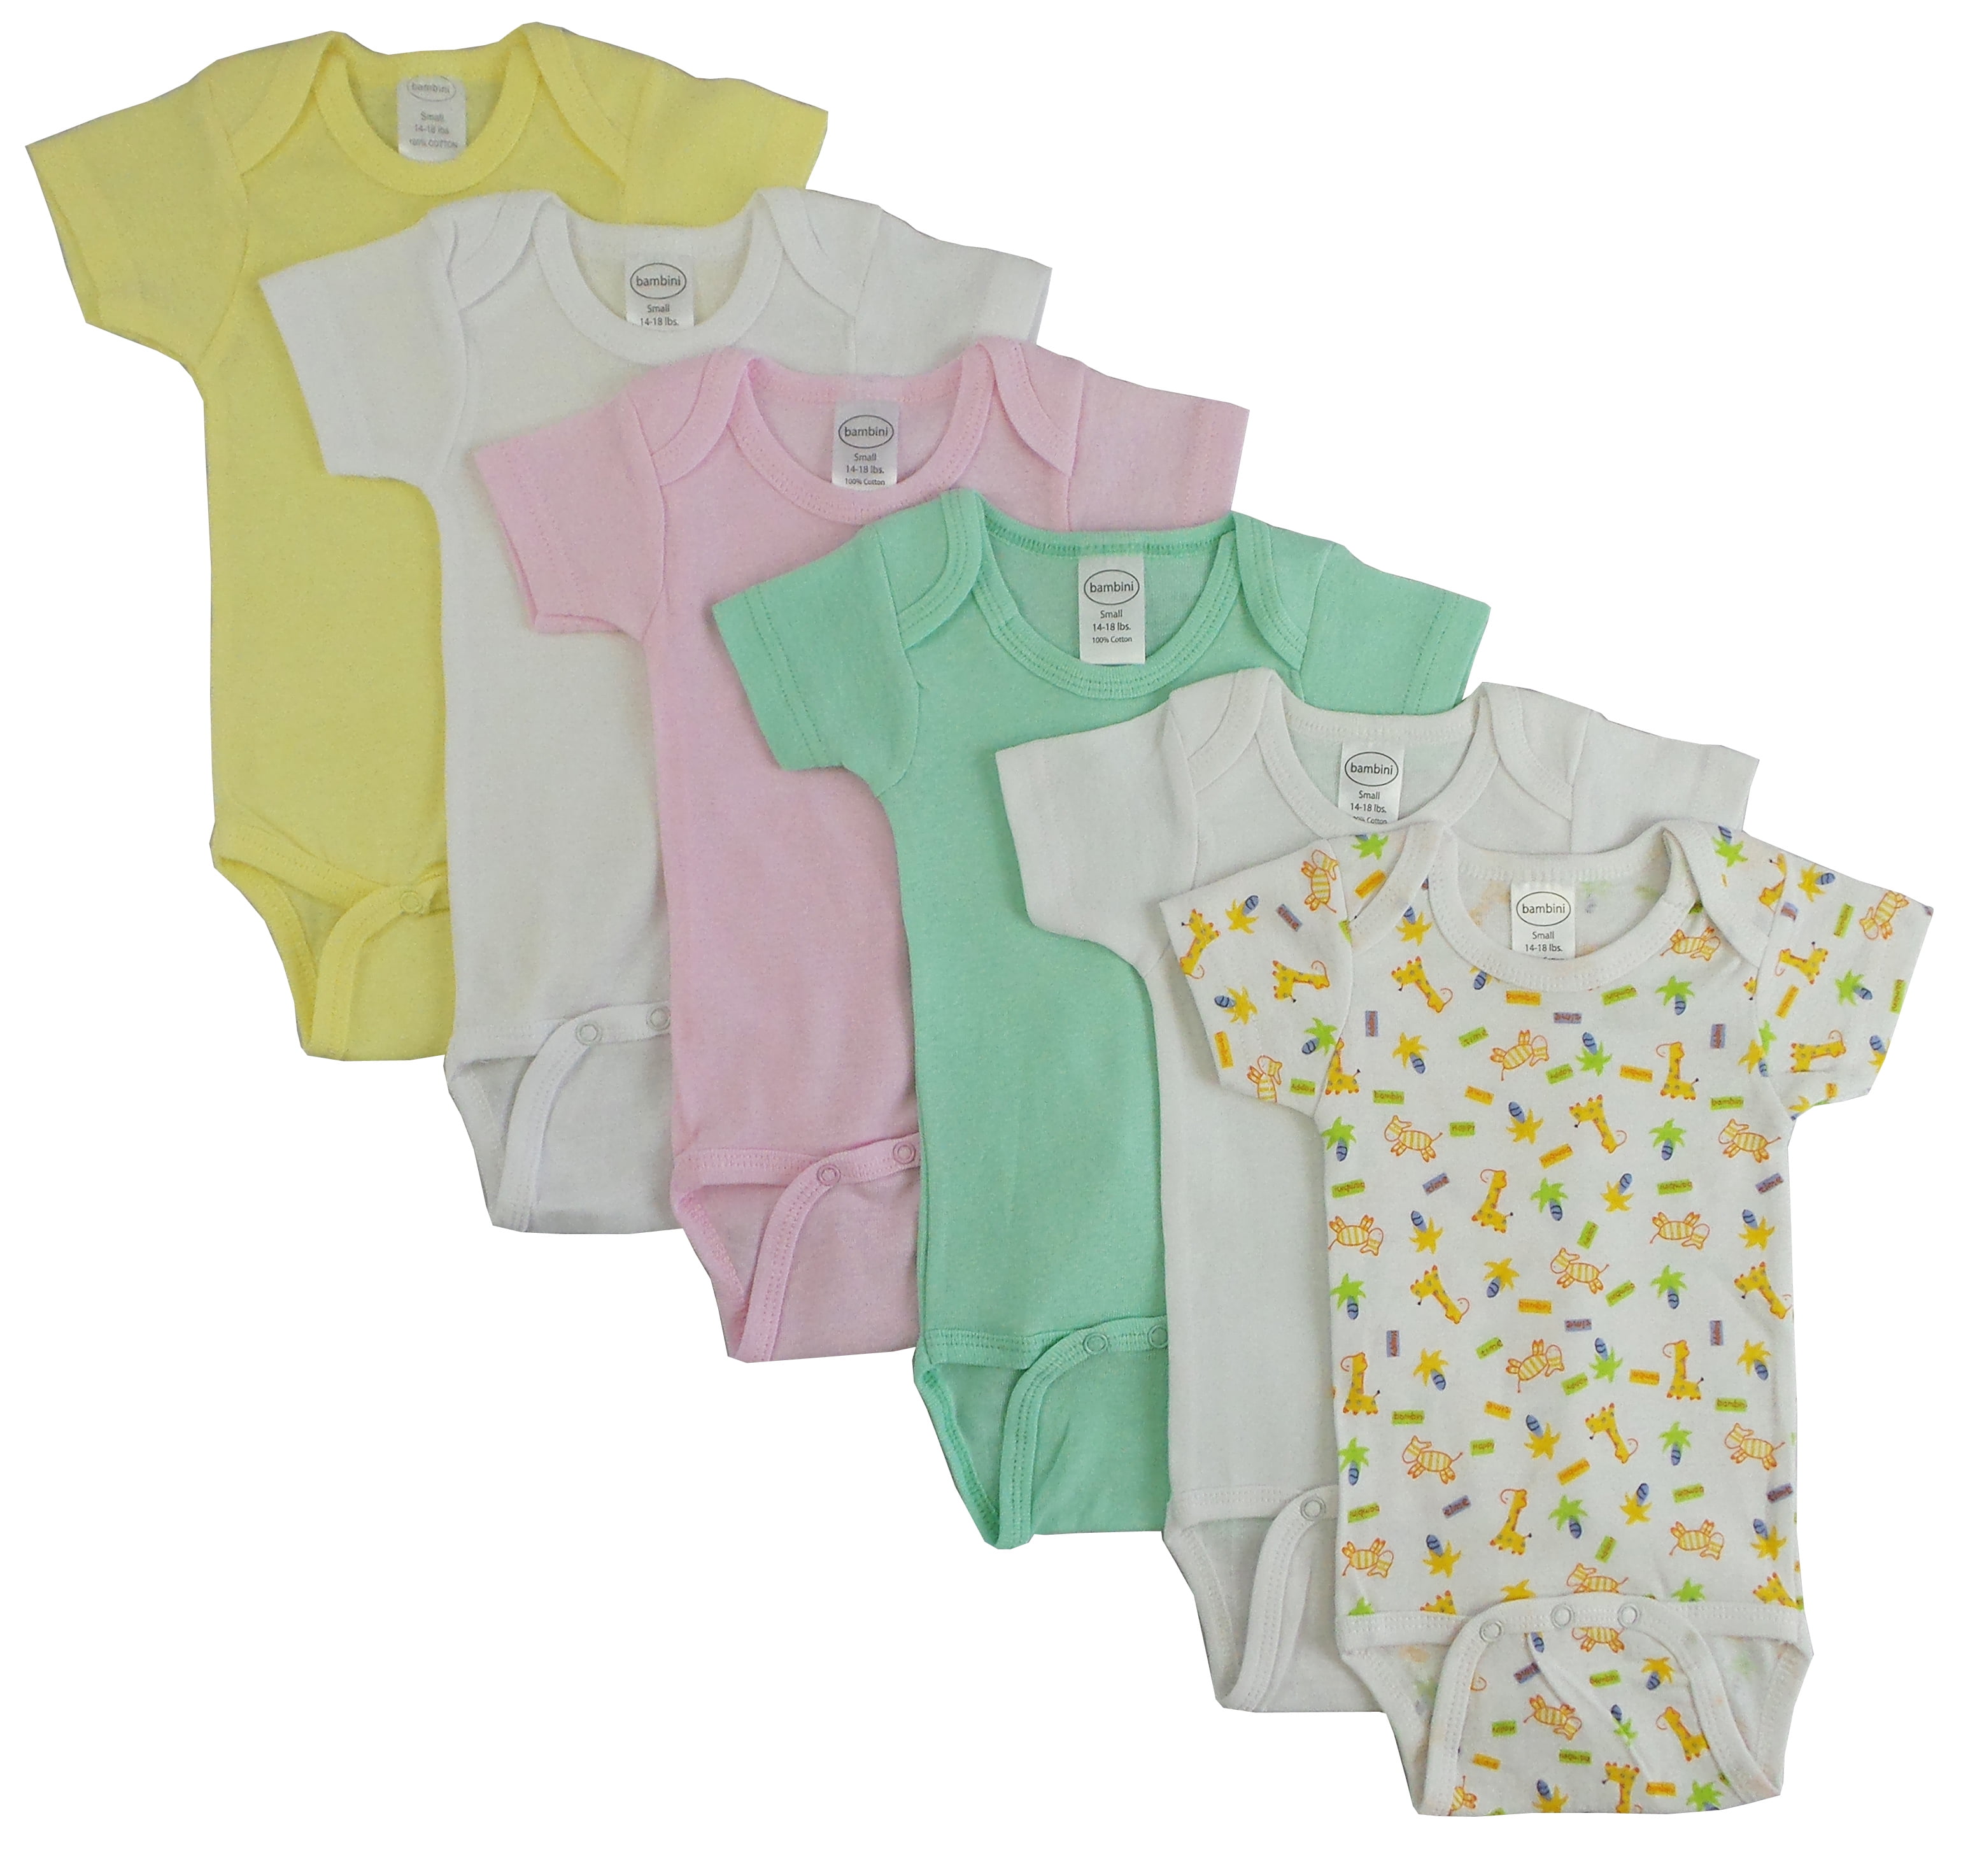 Cs-003s-004s Pastel Girls Short Sleeve With Printed, Assorted - Small